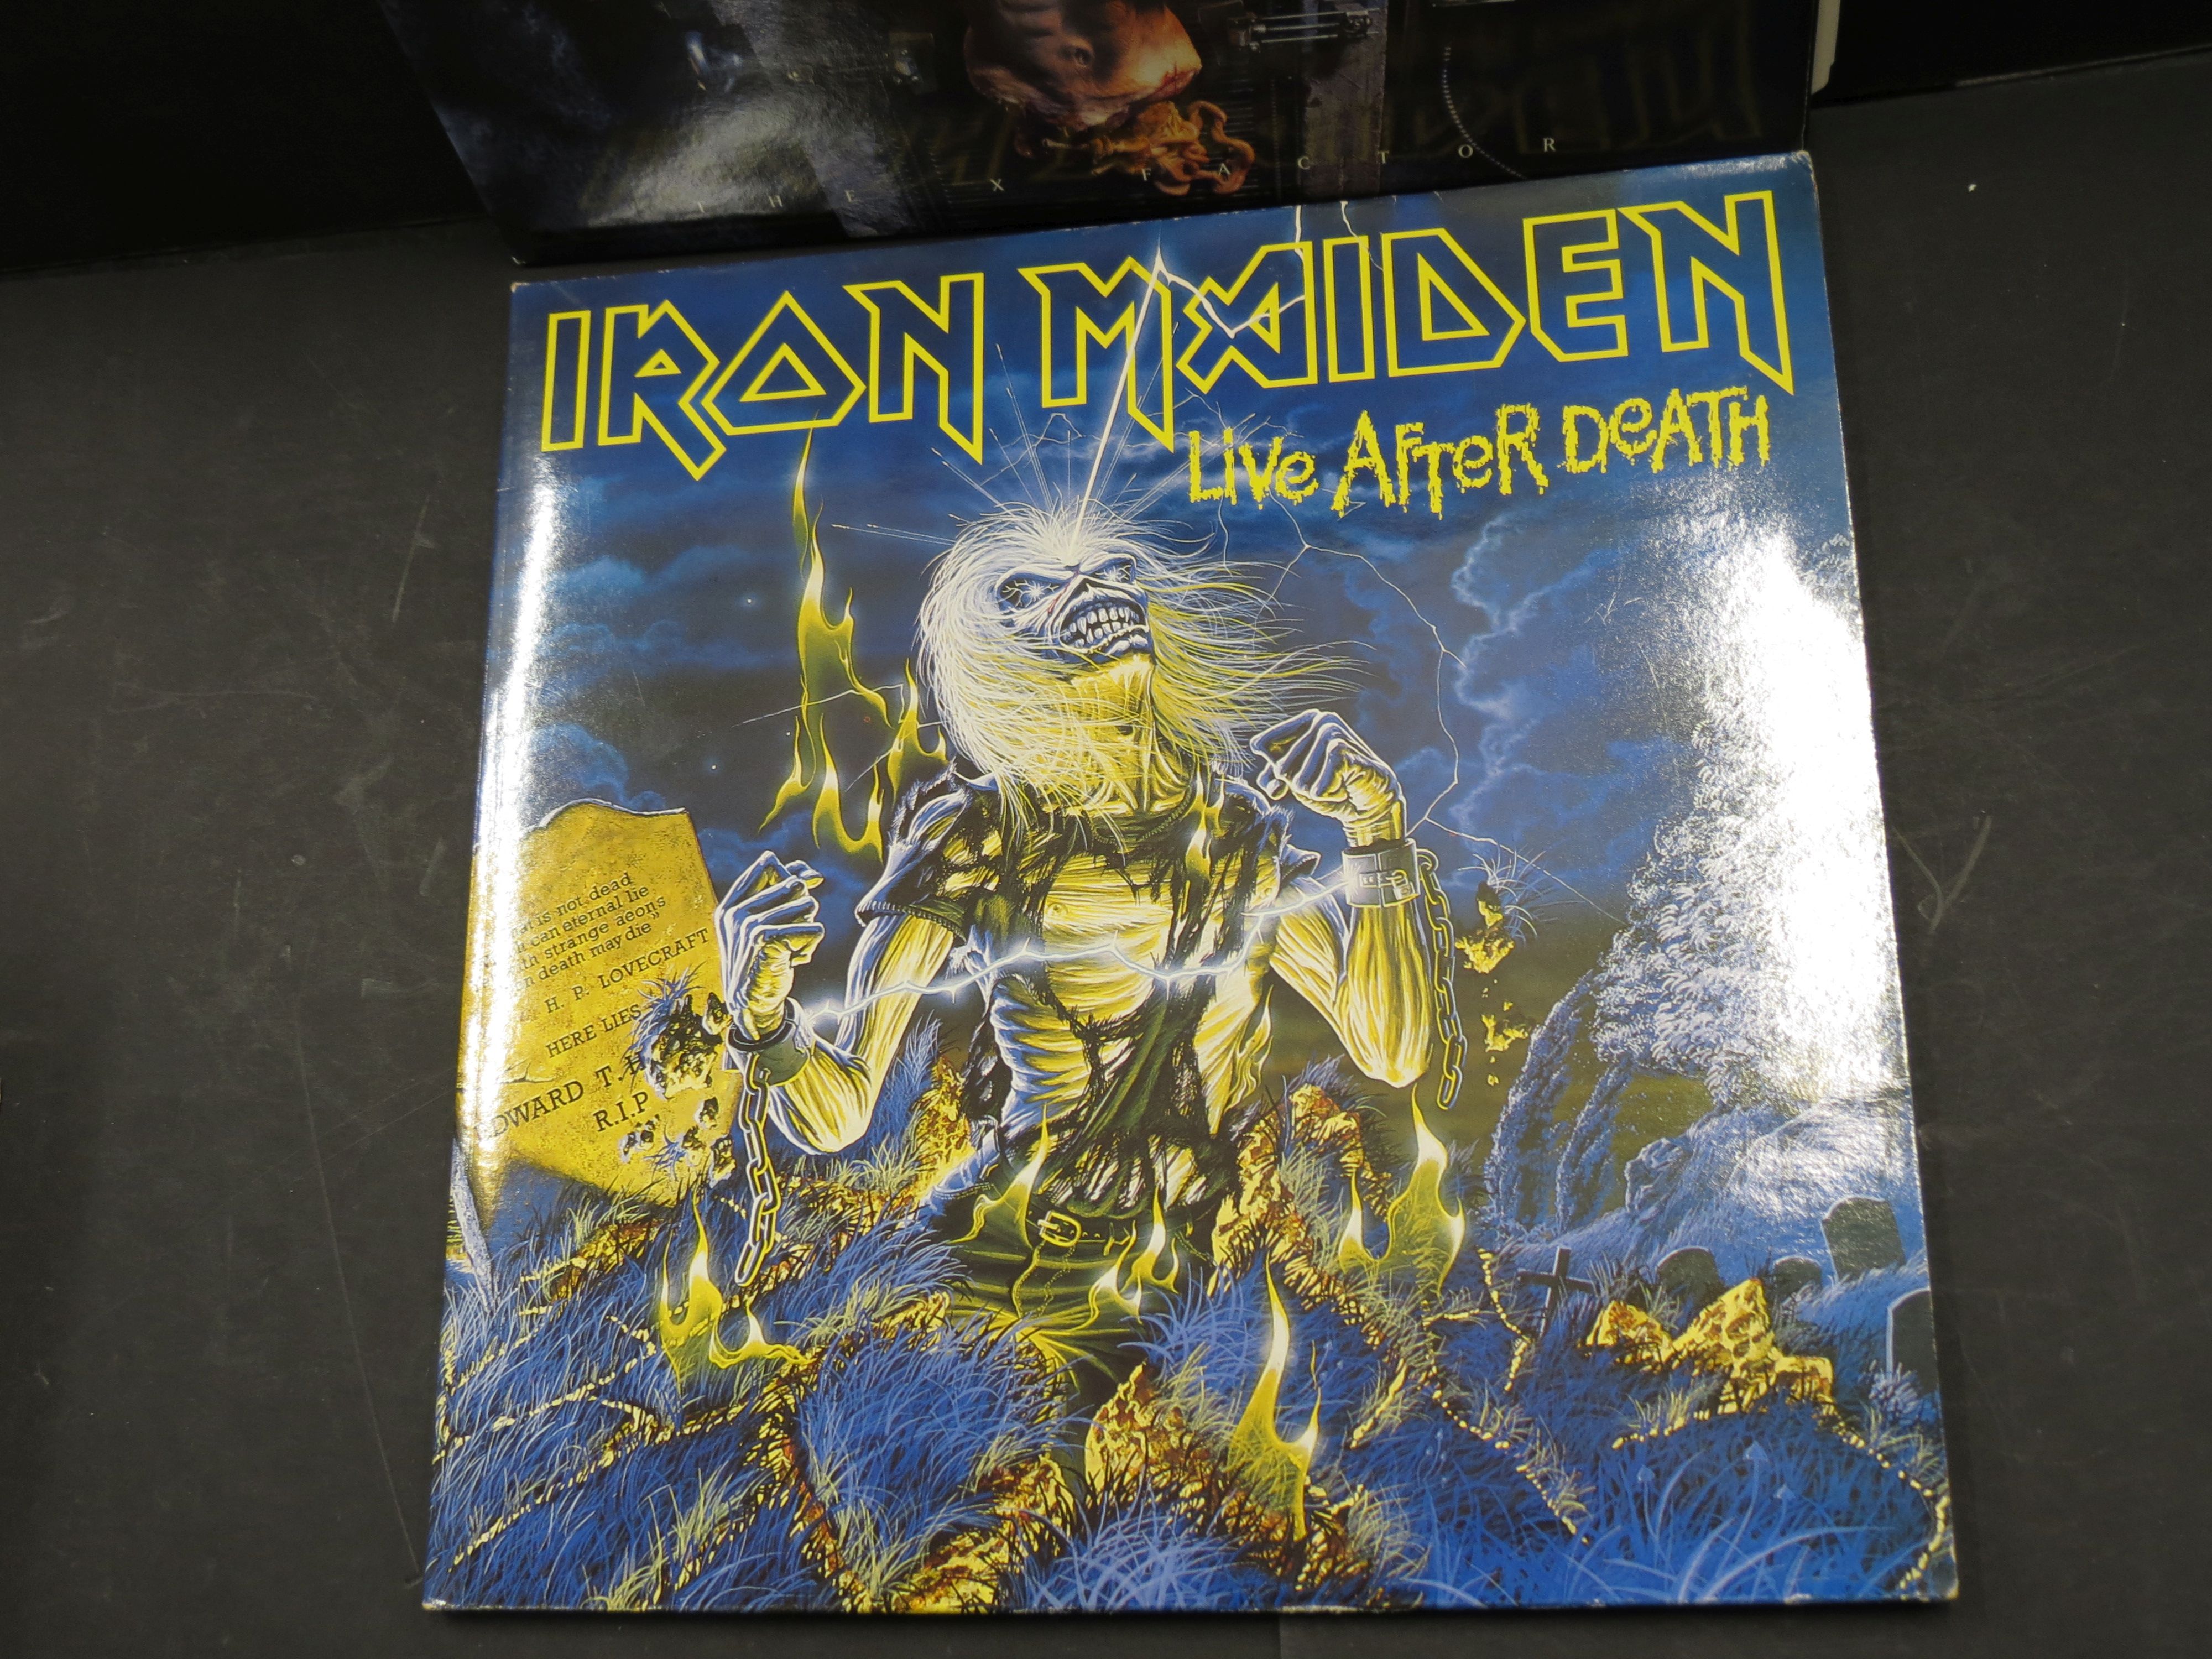 Vinyl - 2 Iron Maiden LPs to include The X Factor double LP on EMI 7243 8 35819 1 7 clear vinyl - Image 4 of 4